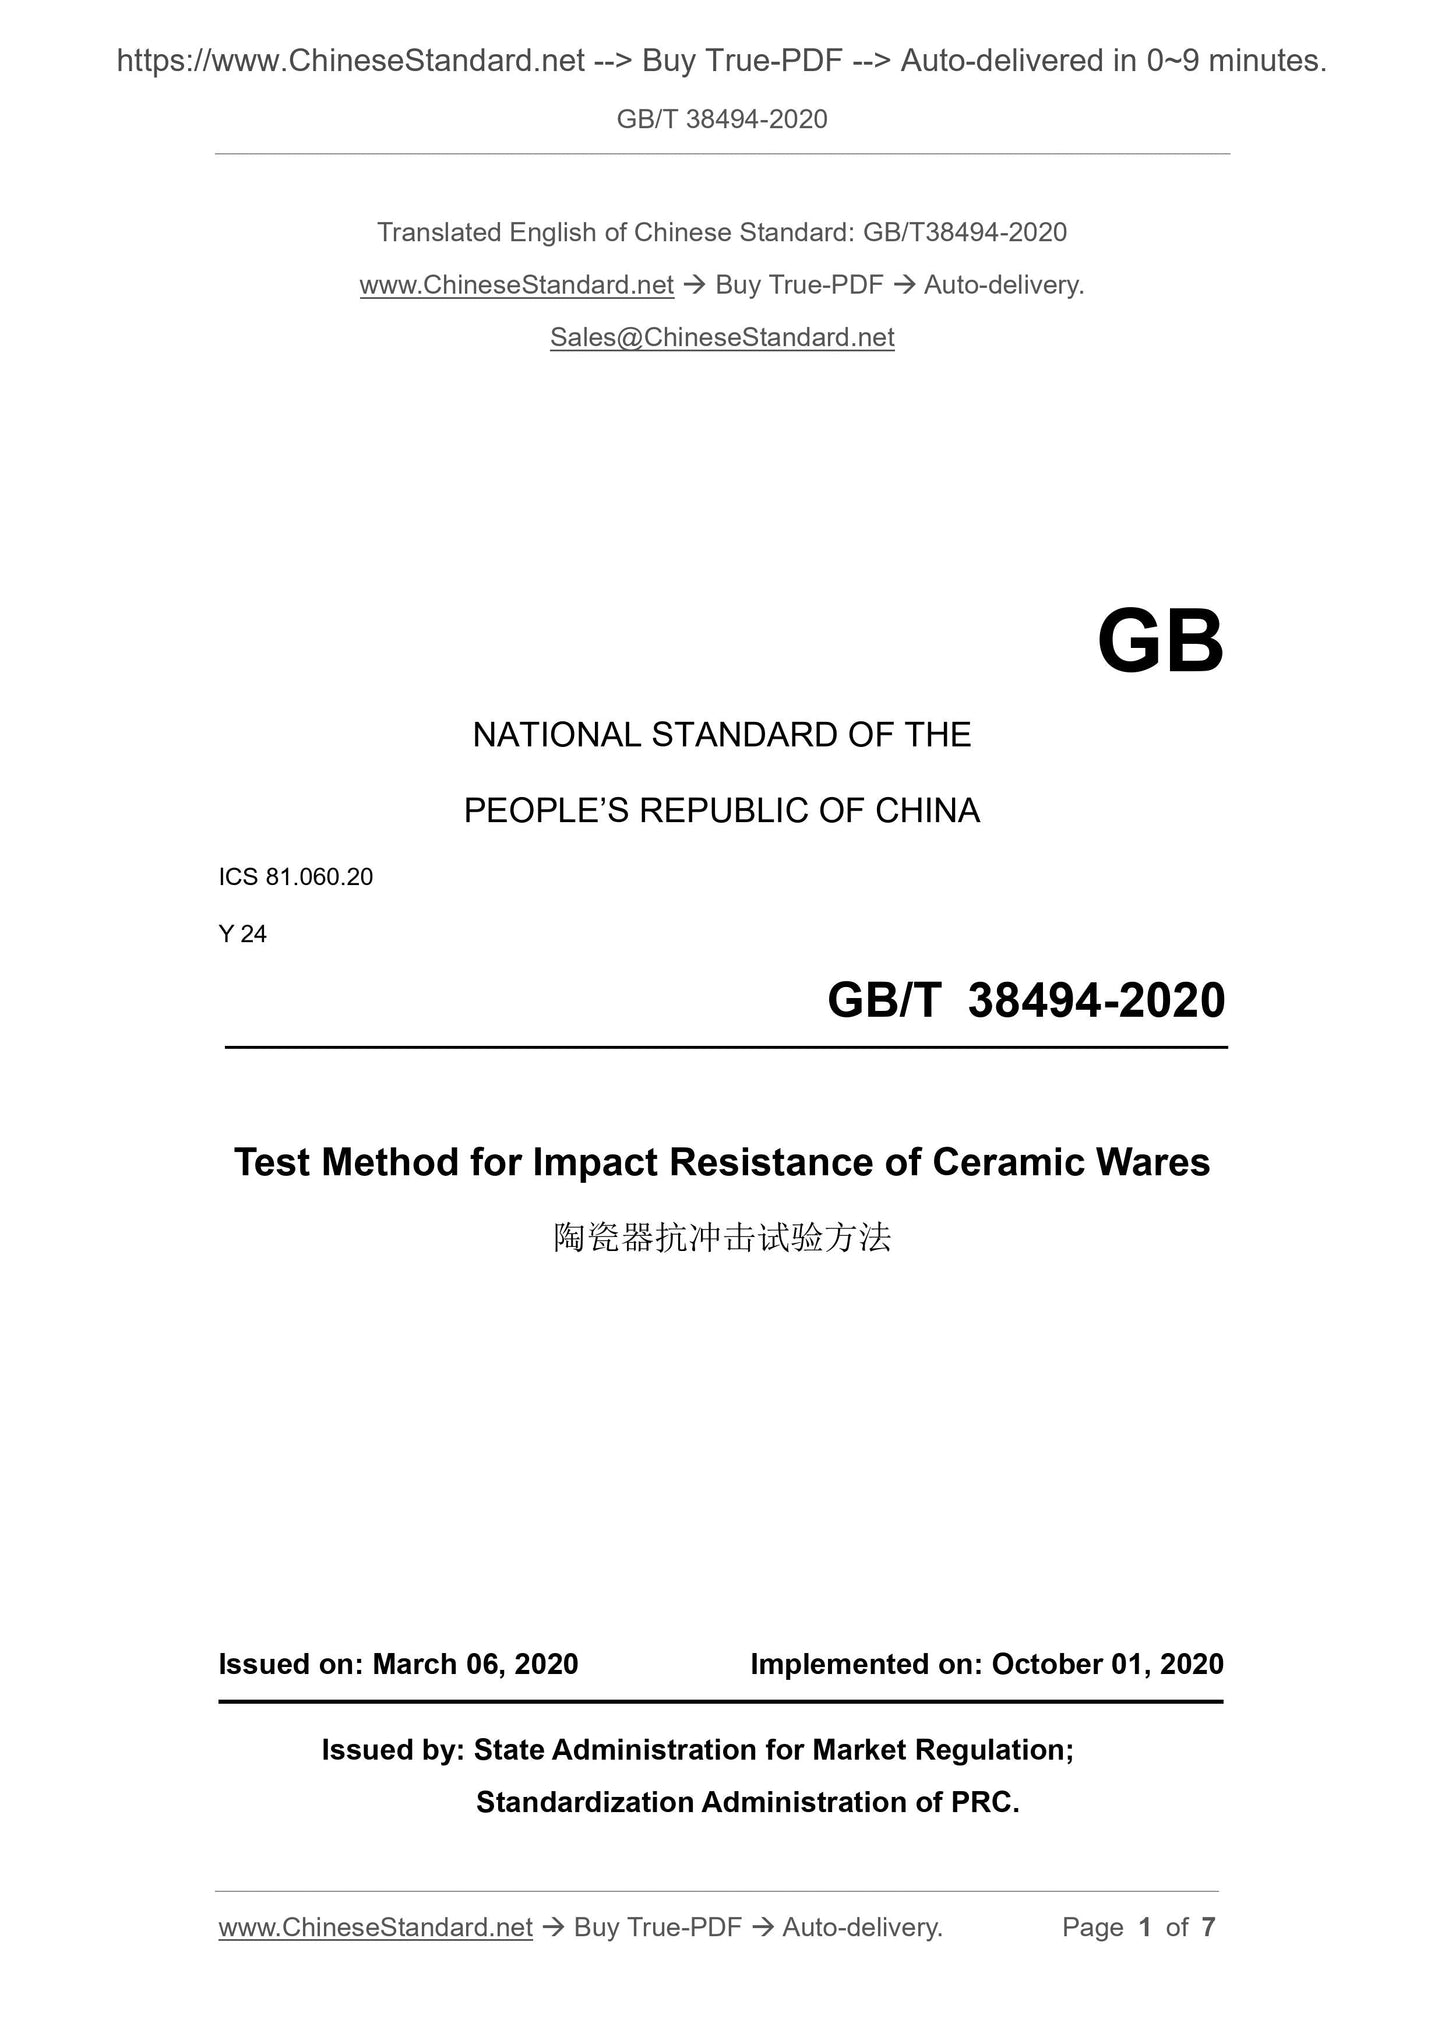 GB/T 38494-2020 Page 1